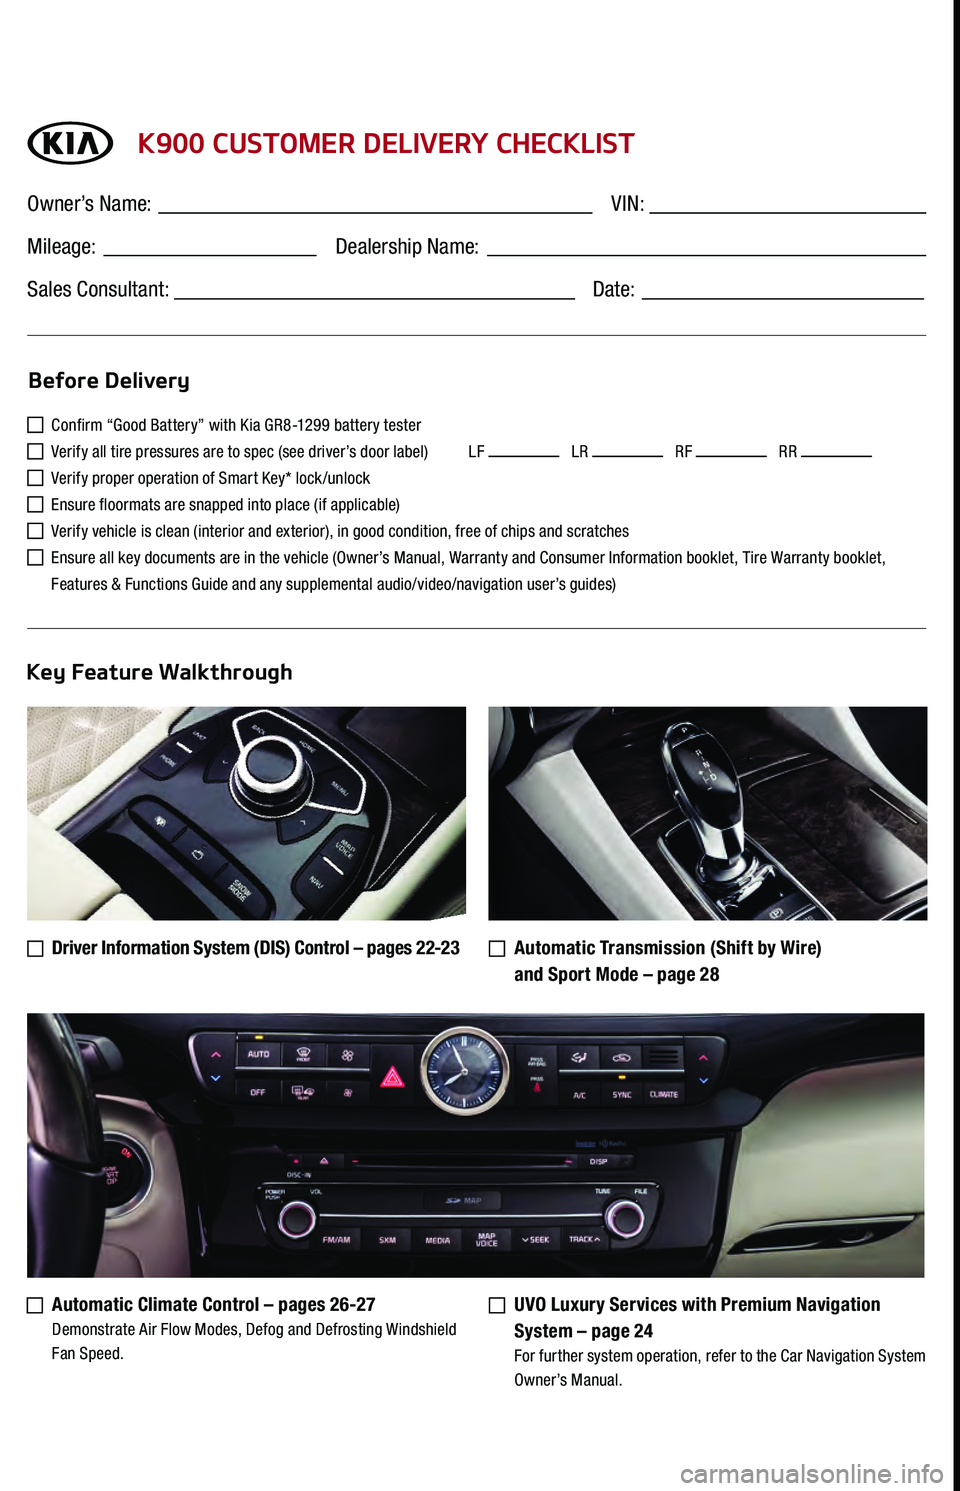 KIA K900 2017  Features and Functions Guide K900 CUSTOMER DELIVERY CHECKLIST
  Confirm “Good Battery” with Kia GR8-1299 battery tester 
  Verify all tire pressures are to spec (see driver’s door label)          LF    LR    RF    RR  
  Ve